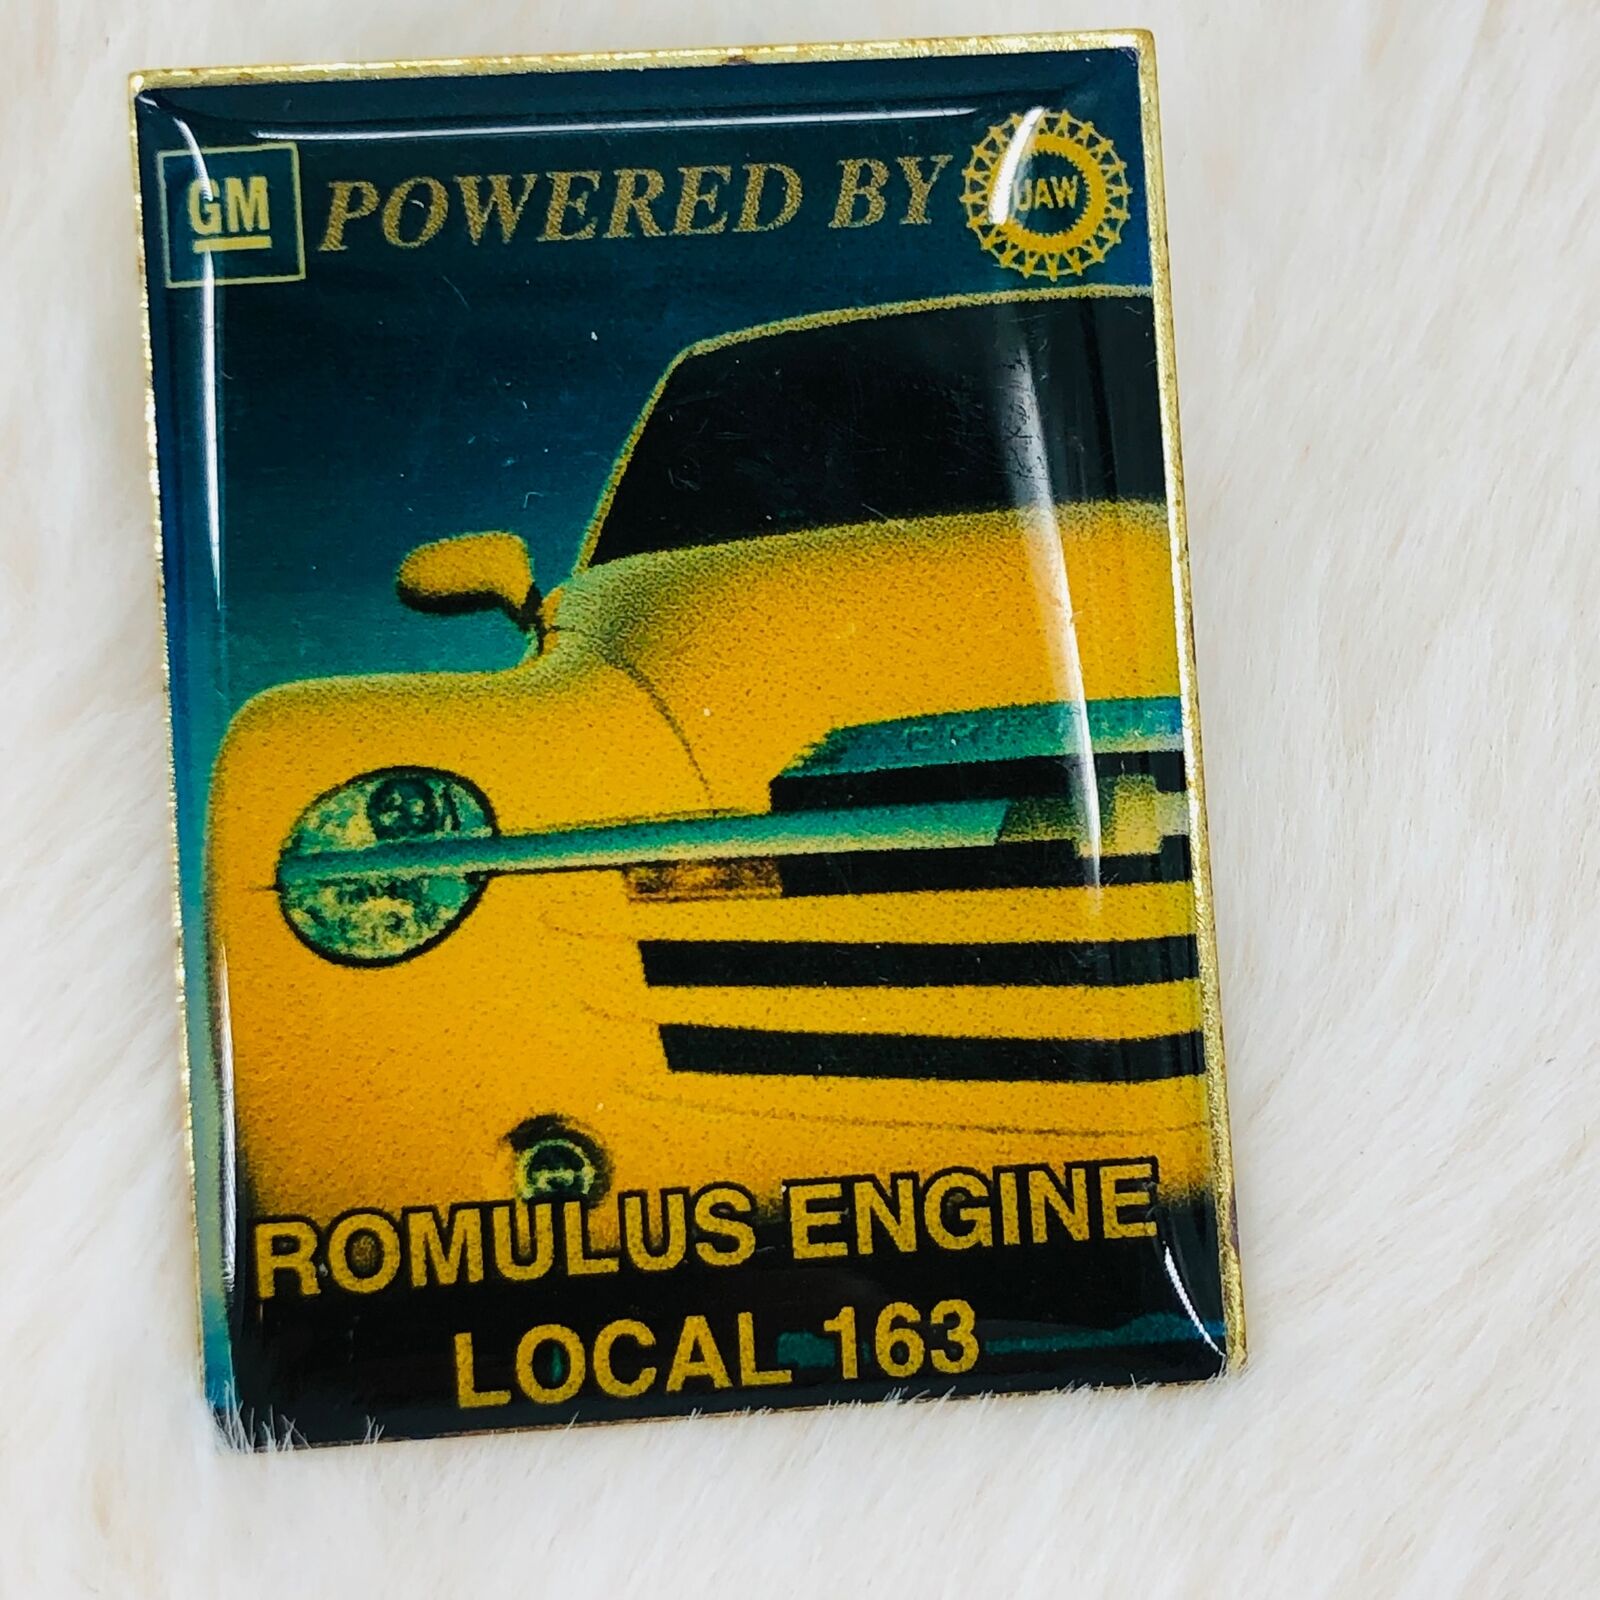 GM UAW Union Local 163 Powered by Romulus Engine Chrysler SSR Roadster